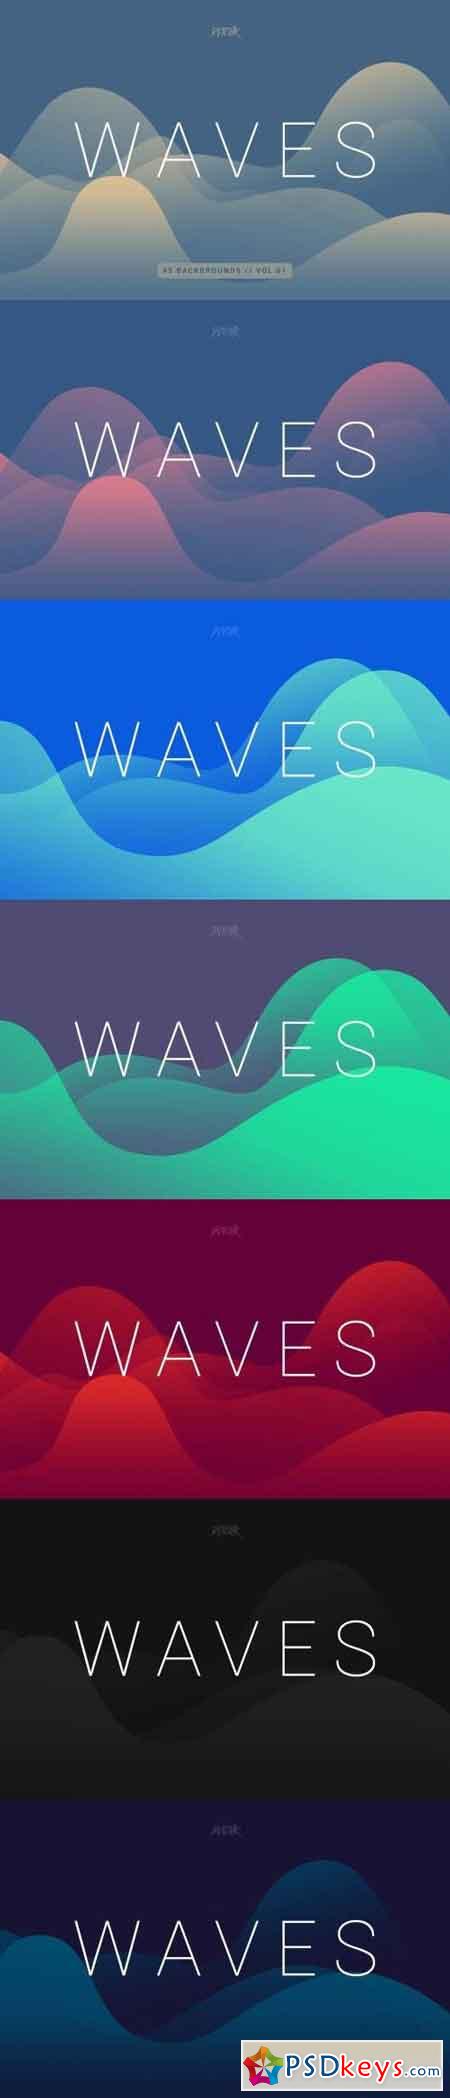 Waves Smooth Colorful Backgrounds Vol. 01